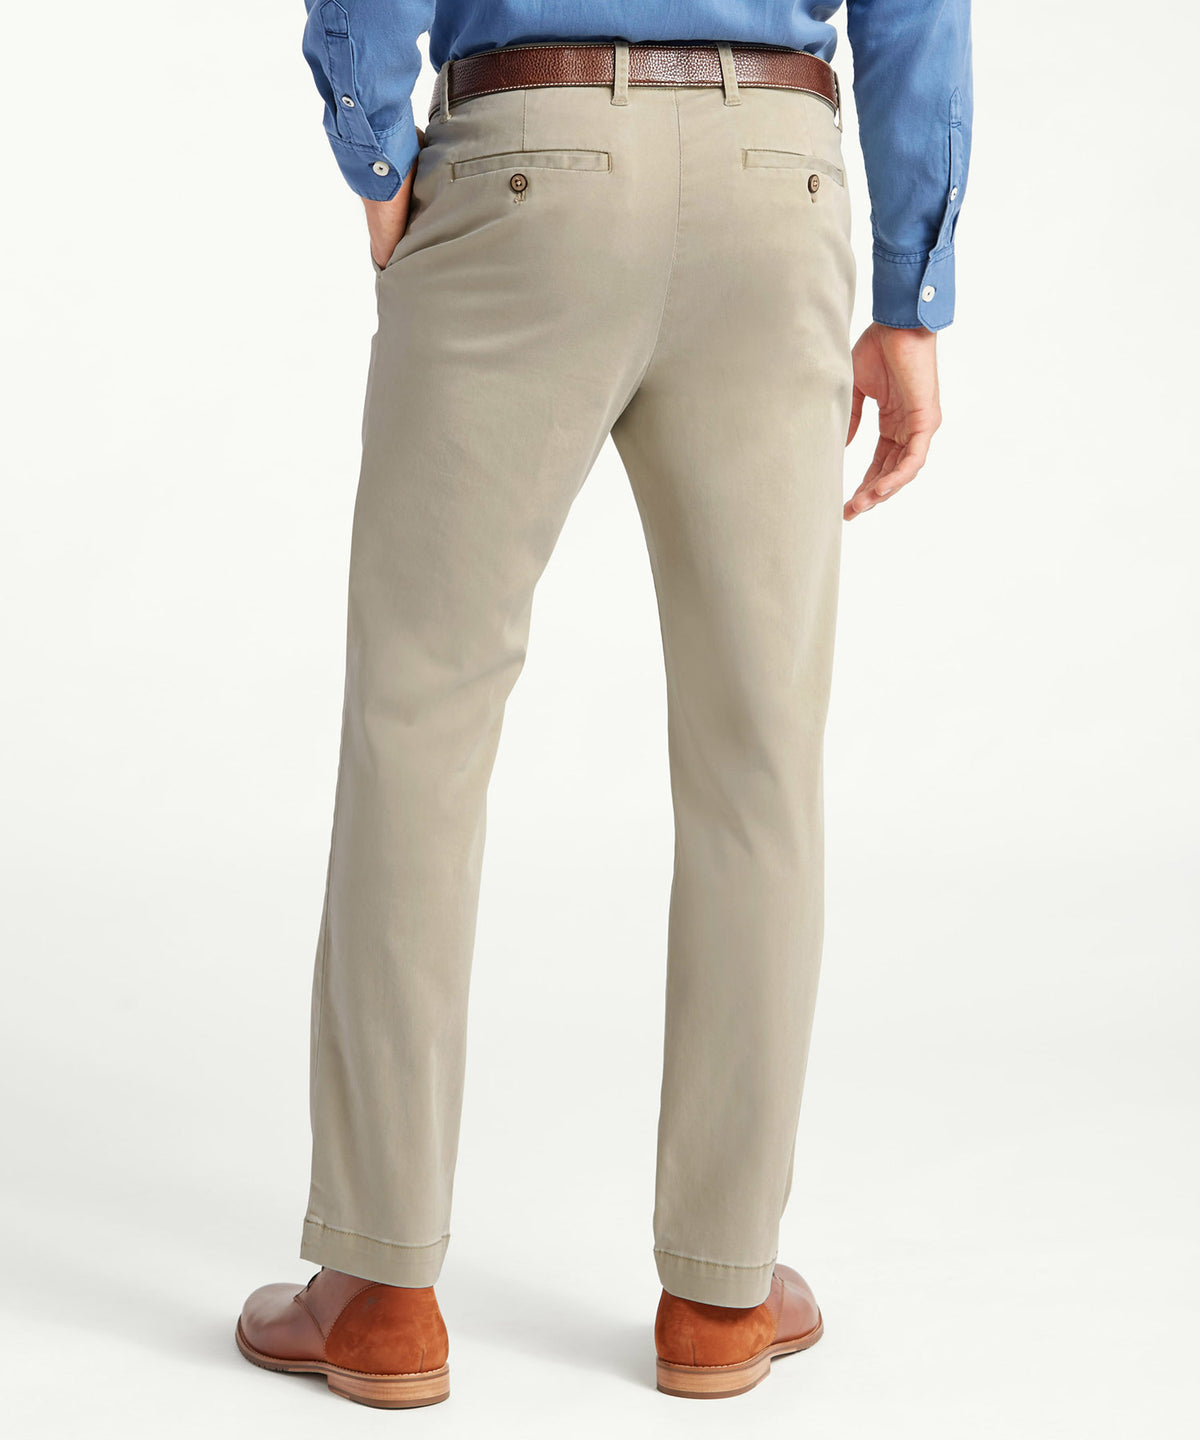 Tommy Bahama Stretch Flat-Front Sateen Chino Pants, Men's Big & Tall